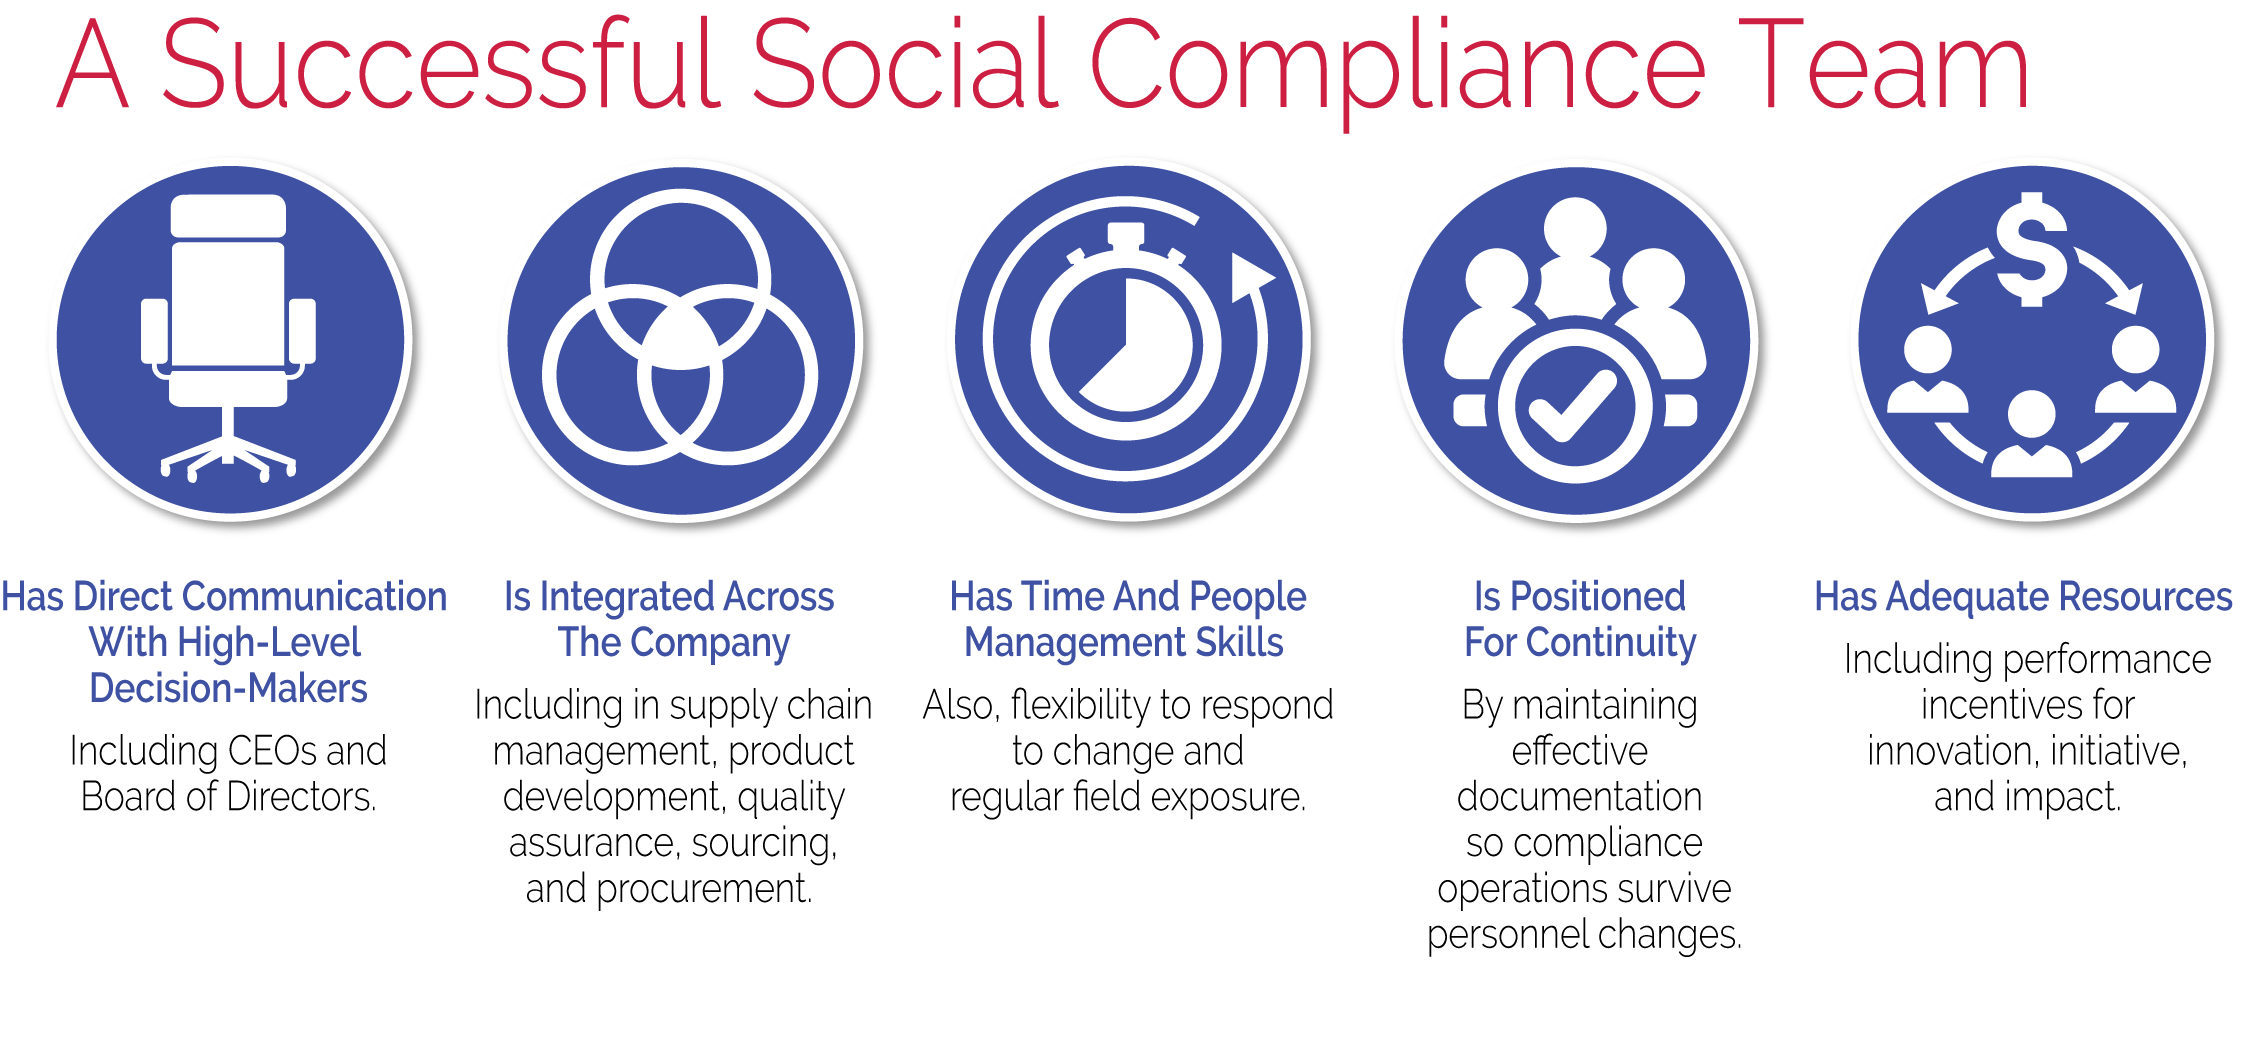 A successful social compliance team will have direct communication with high-level decision-makers, integration across the company, time and people management skills, effective documentation, and adequate resources.